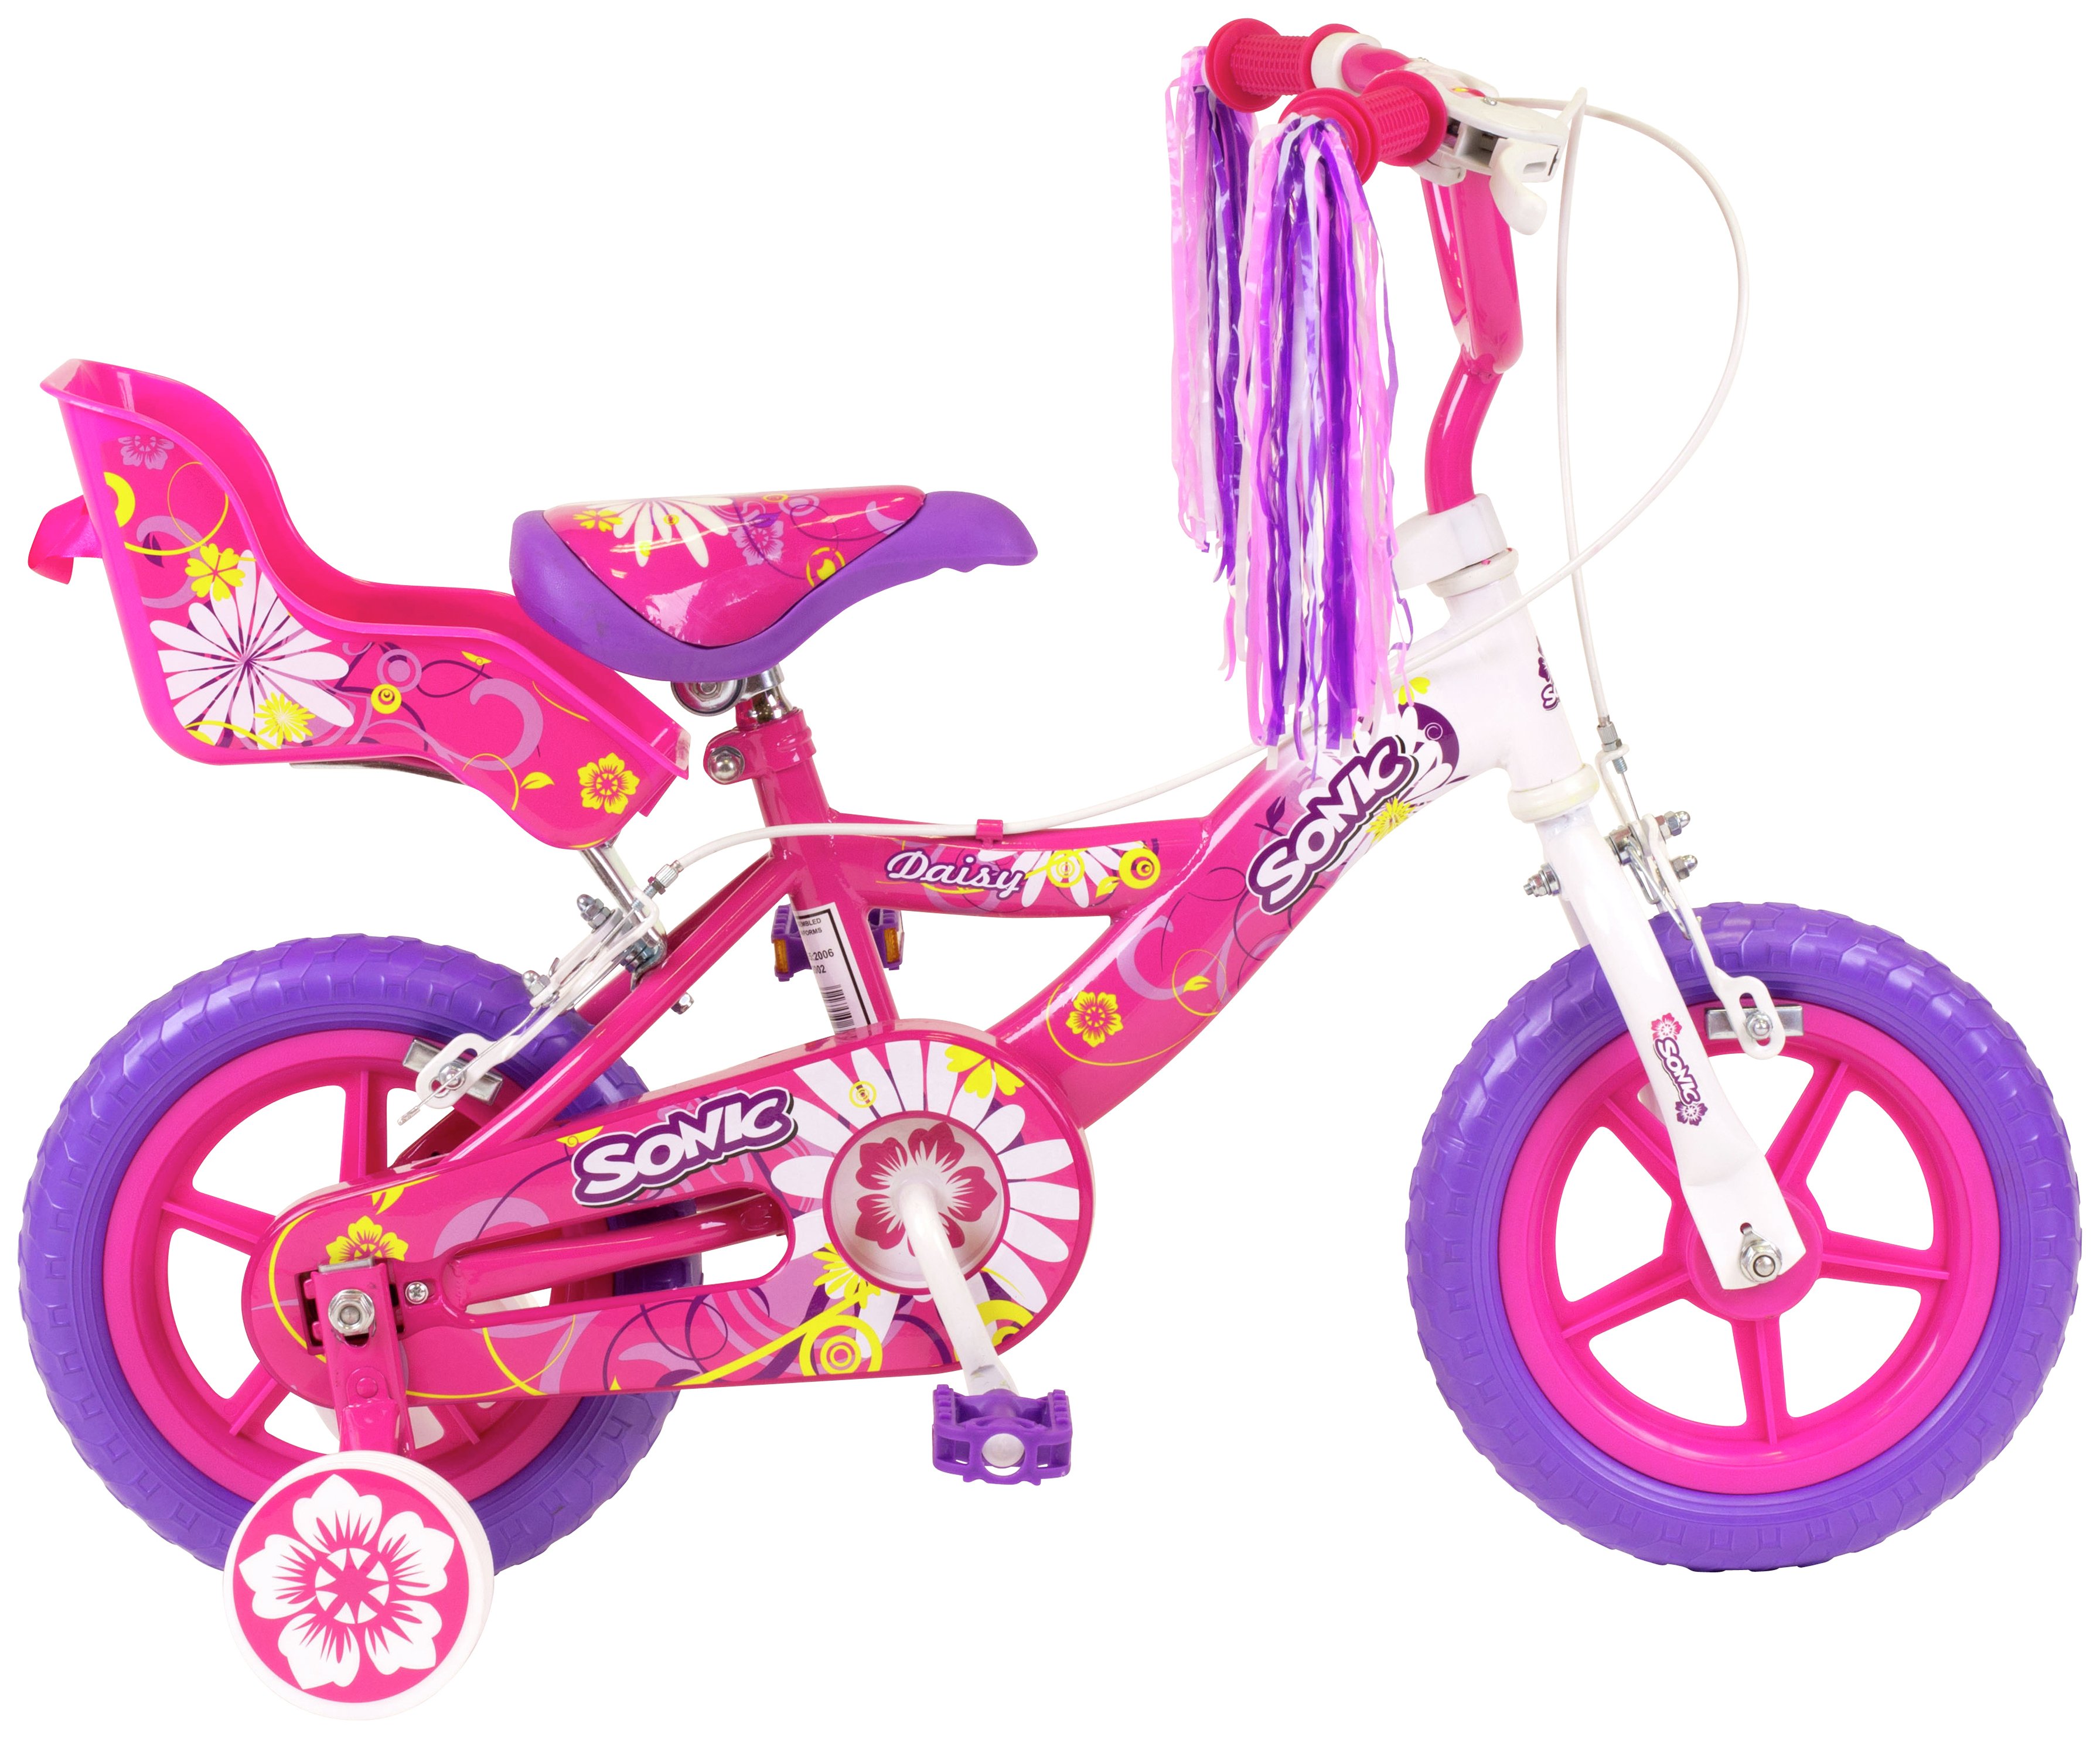 Sonic Glitz 12'' Kids' Bike – with stabilisers | Toys - compare and save3584 x 2967